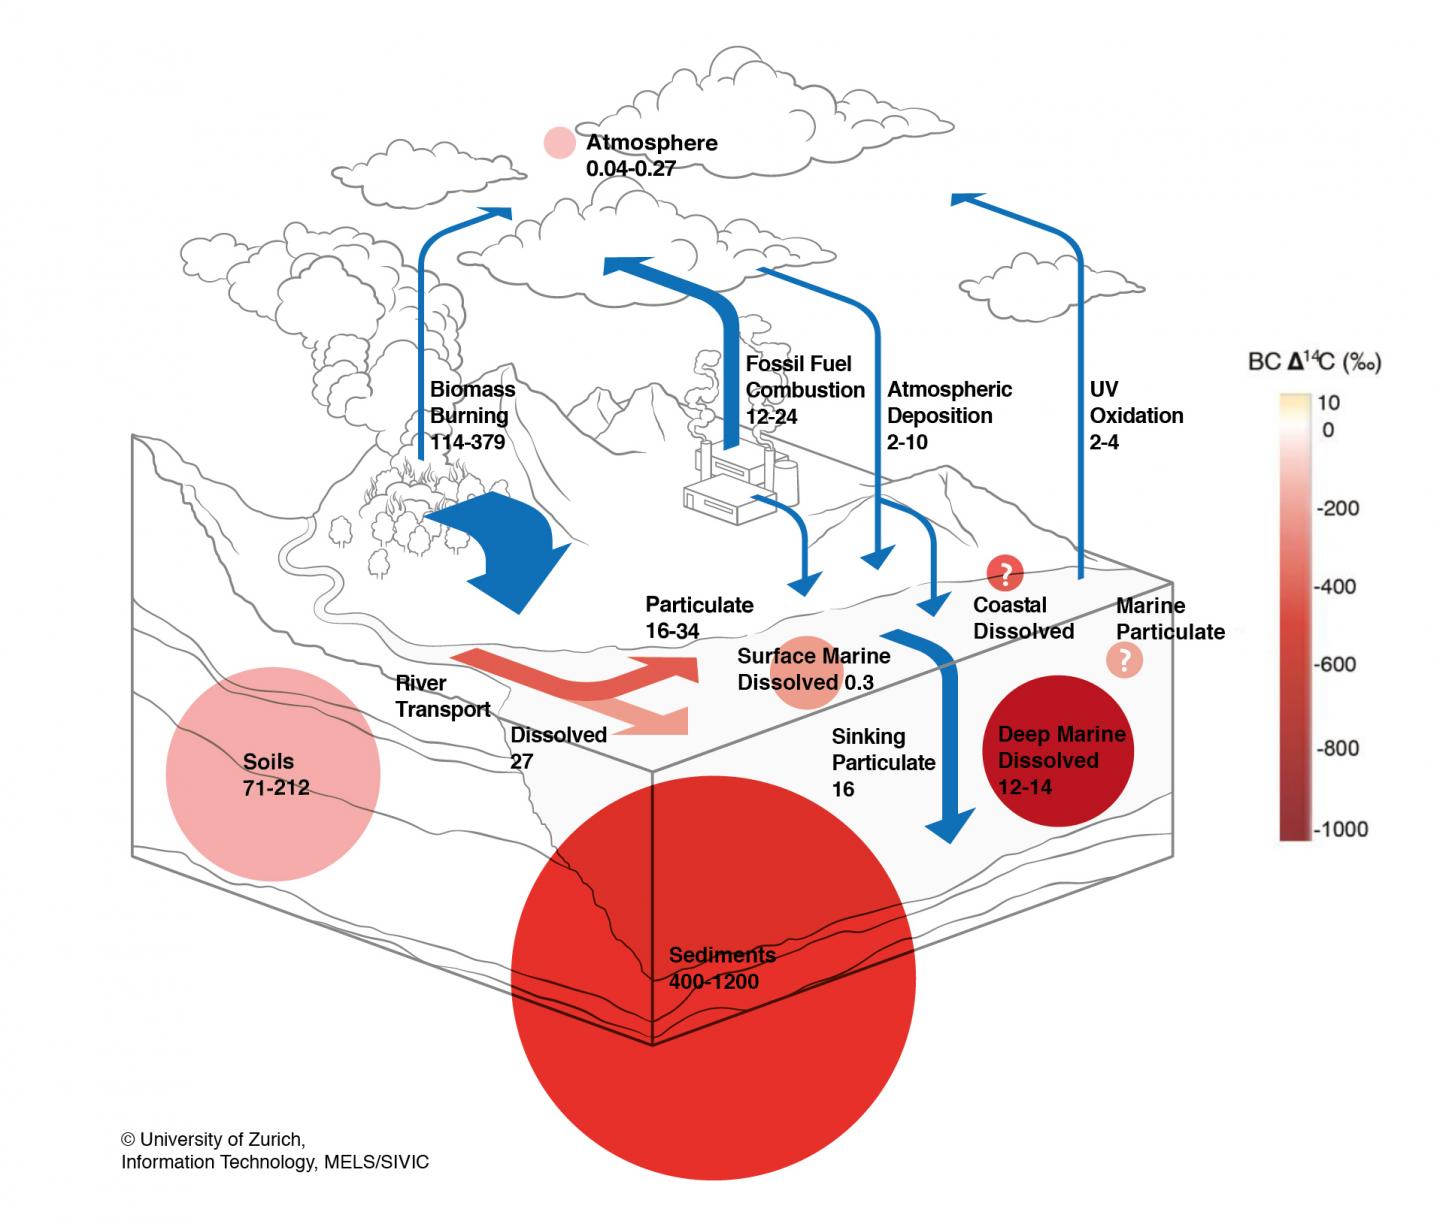 Global Black Carbon Cycle in Large Reservoirs